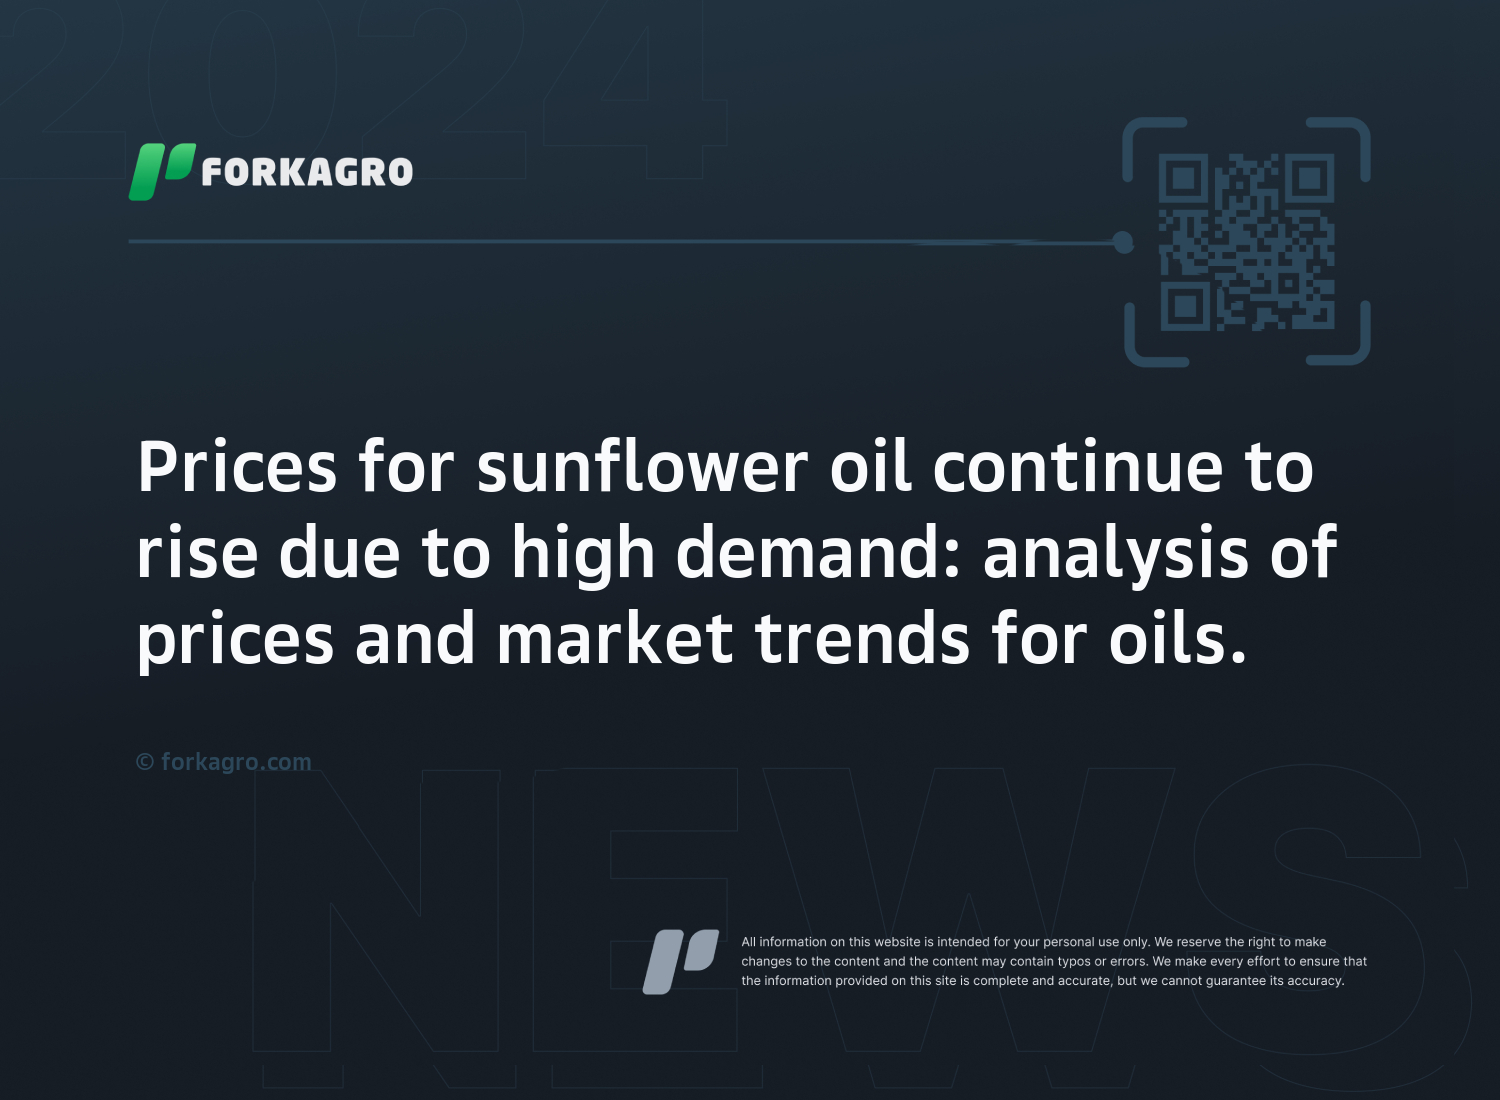 Prices for sunflower oil continue to rise due to high demand: analysis of prices and market trends for oils.